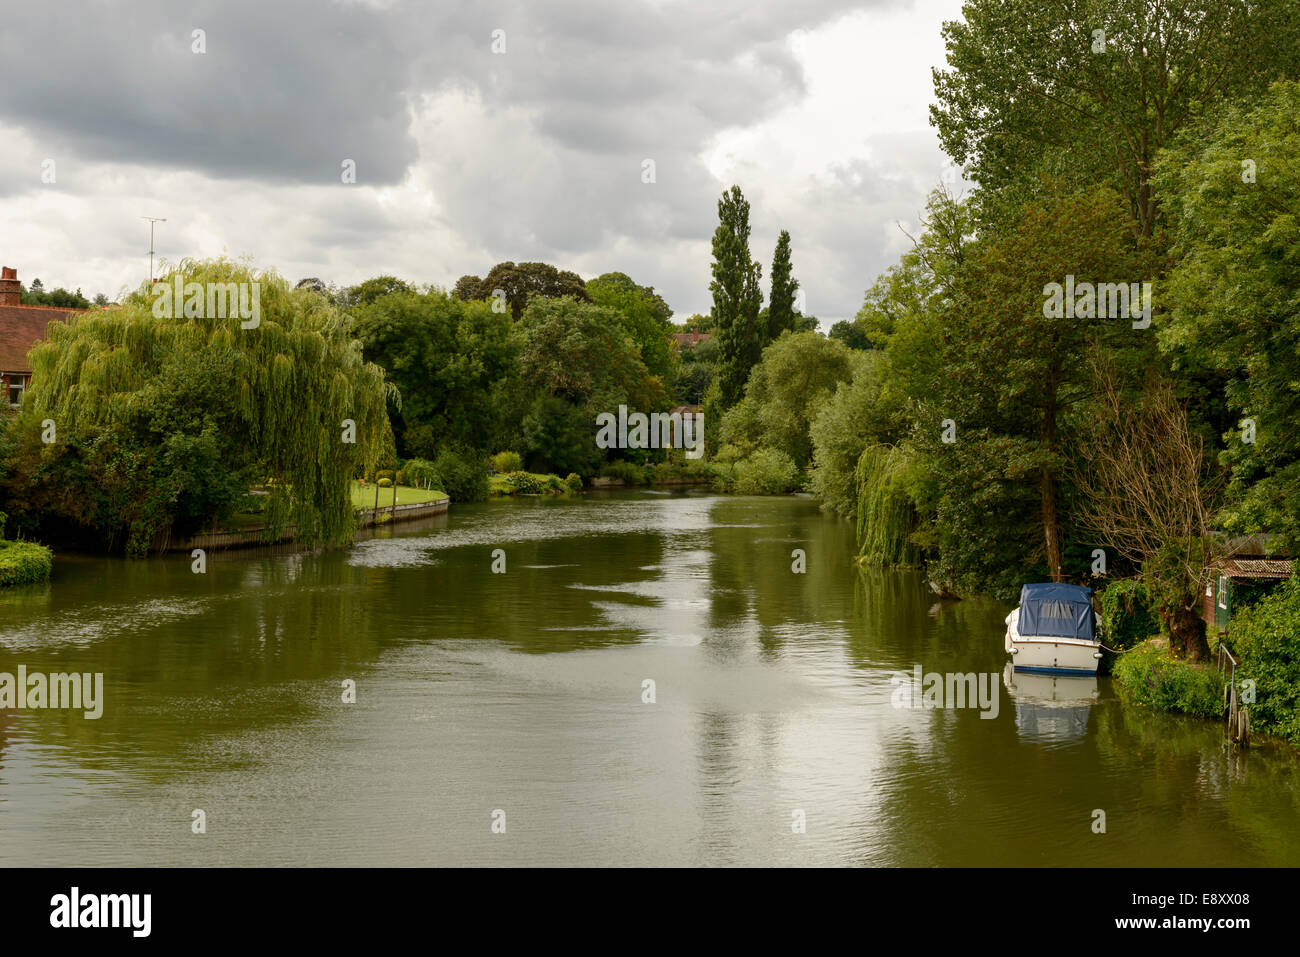 Thames river at Pangbourne, Berkshire, view of river Thames near old touristic village , shot under cloudy yet bright sky Stock Photo